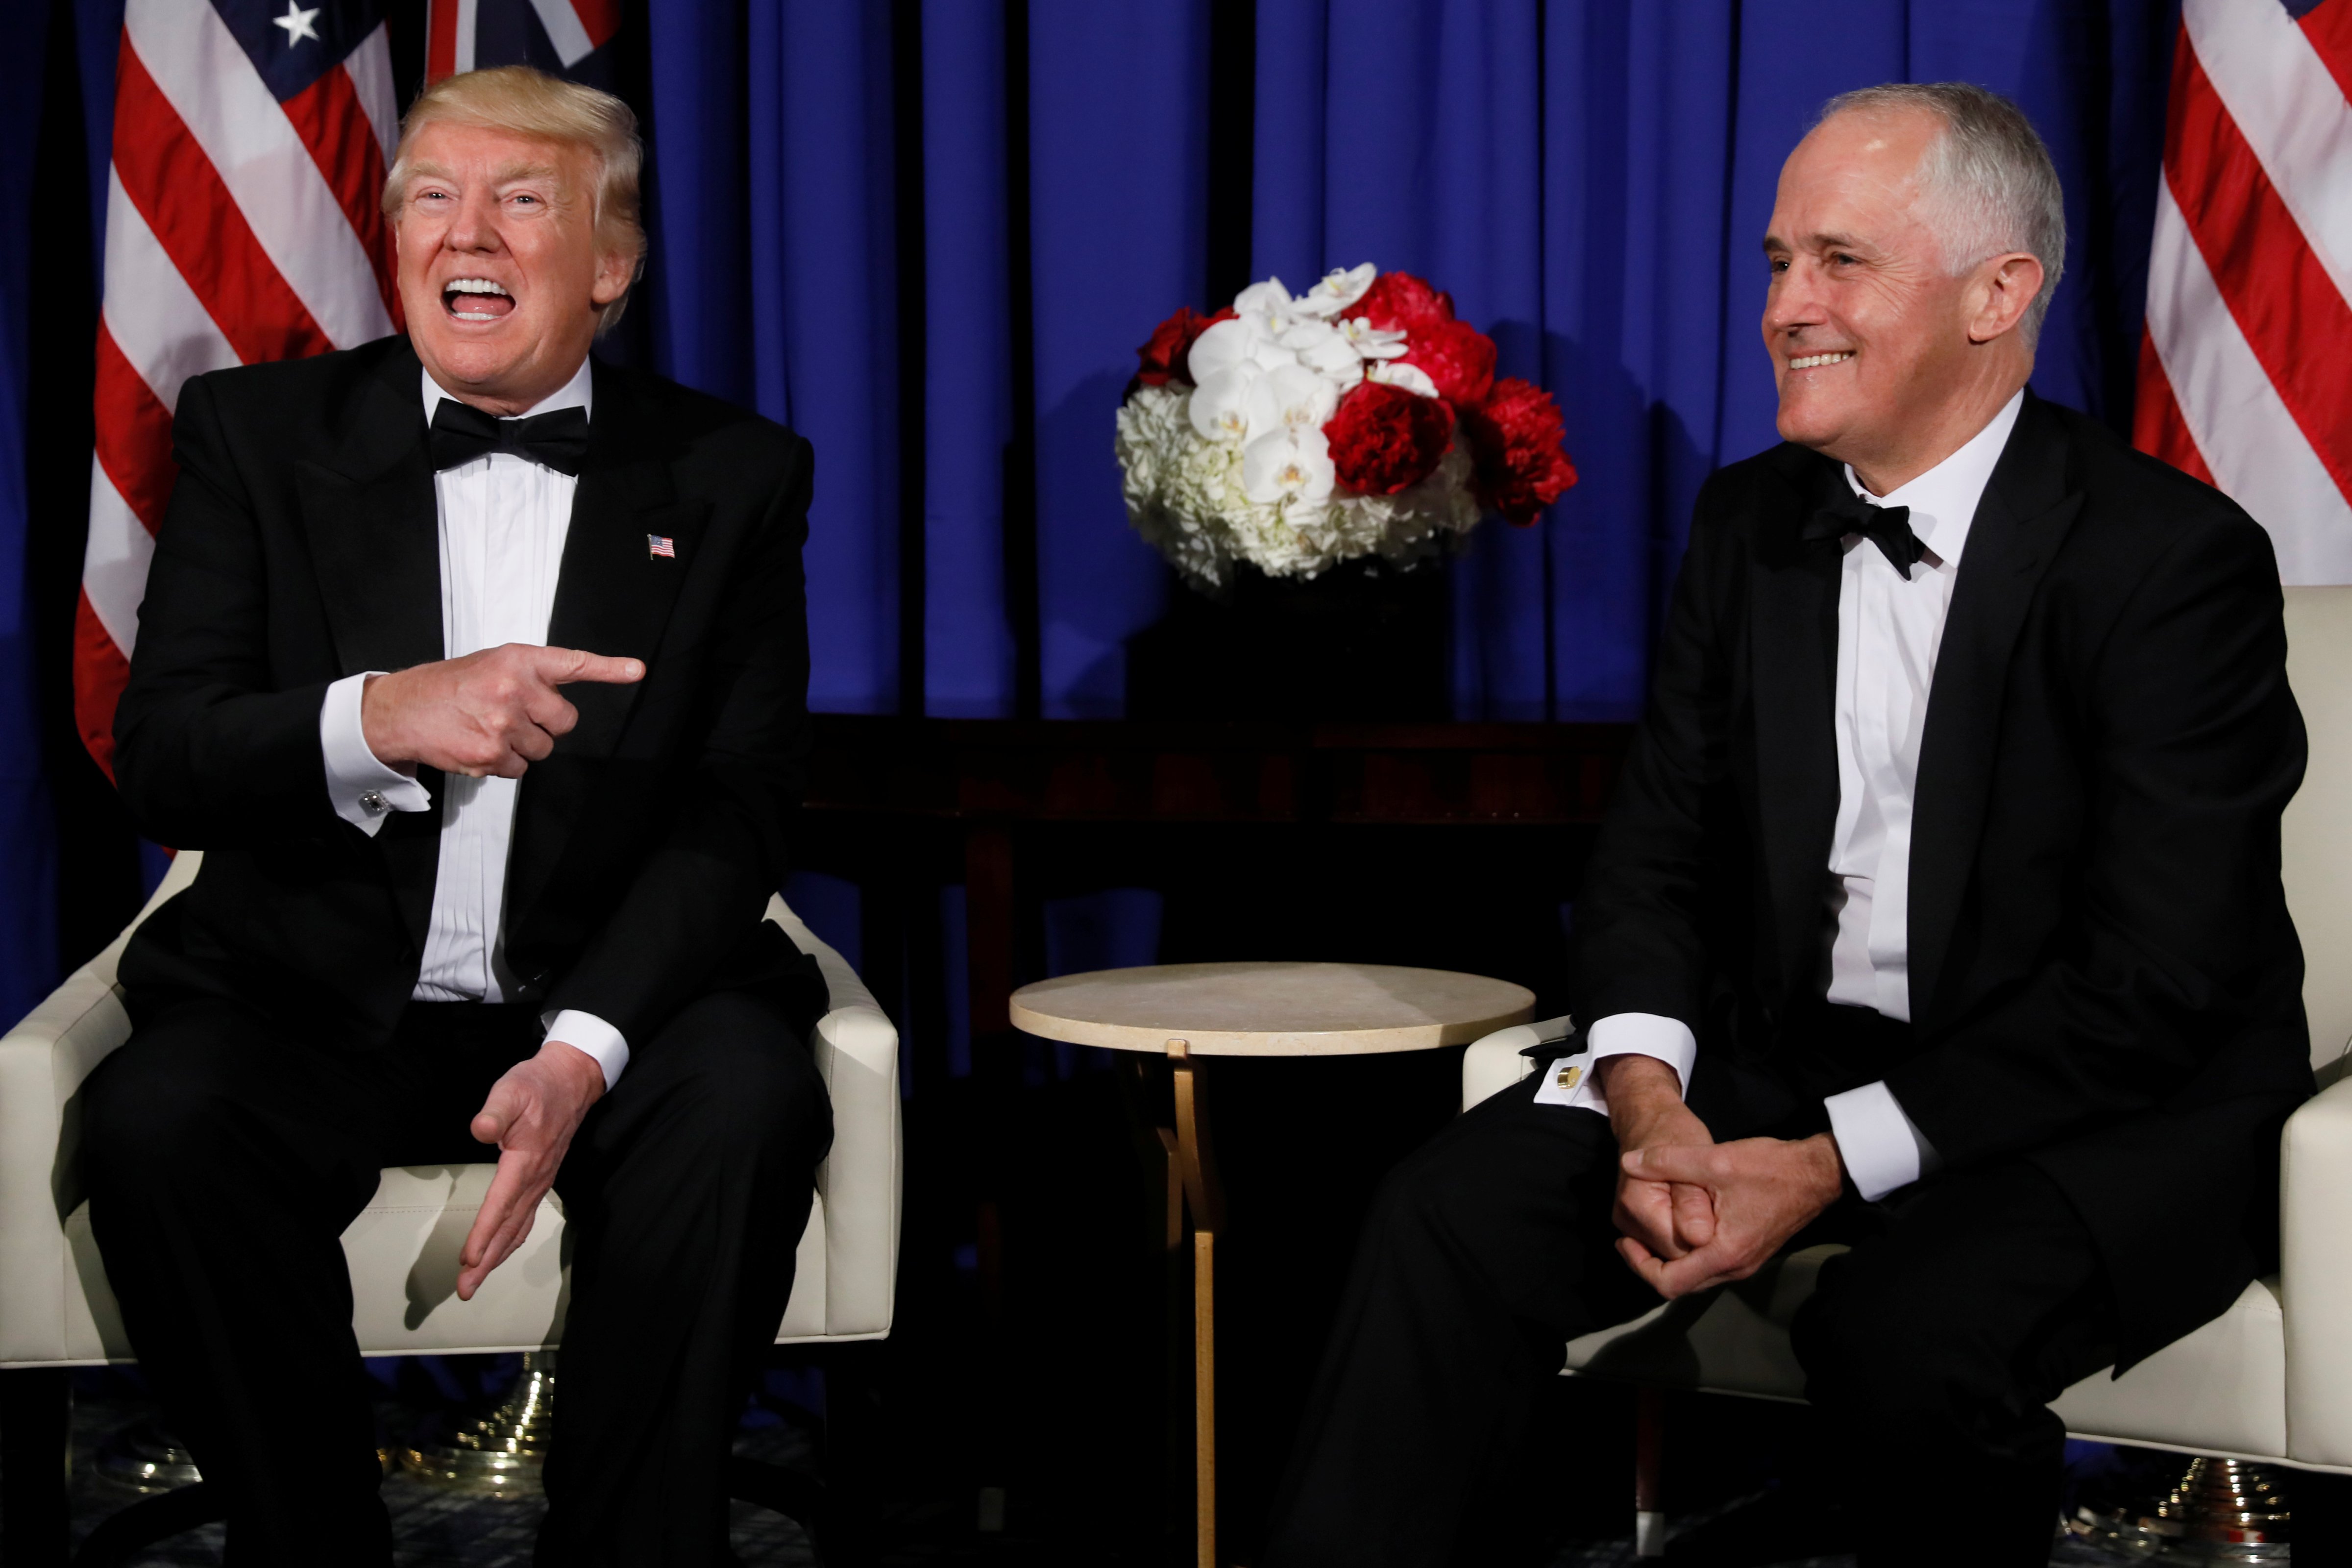 President Trump and Australia's Prime Minister Malcolm Turnbull deliver remarks to reporters as they meet in New York, May 4, 2017. (Jonathan Ernst—Reuters)